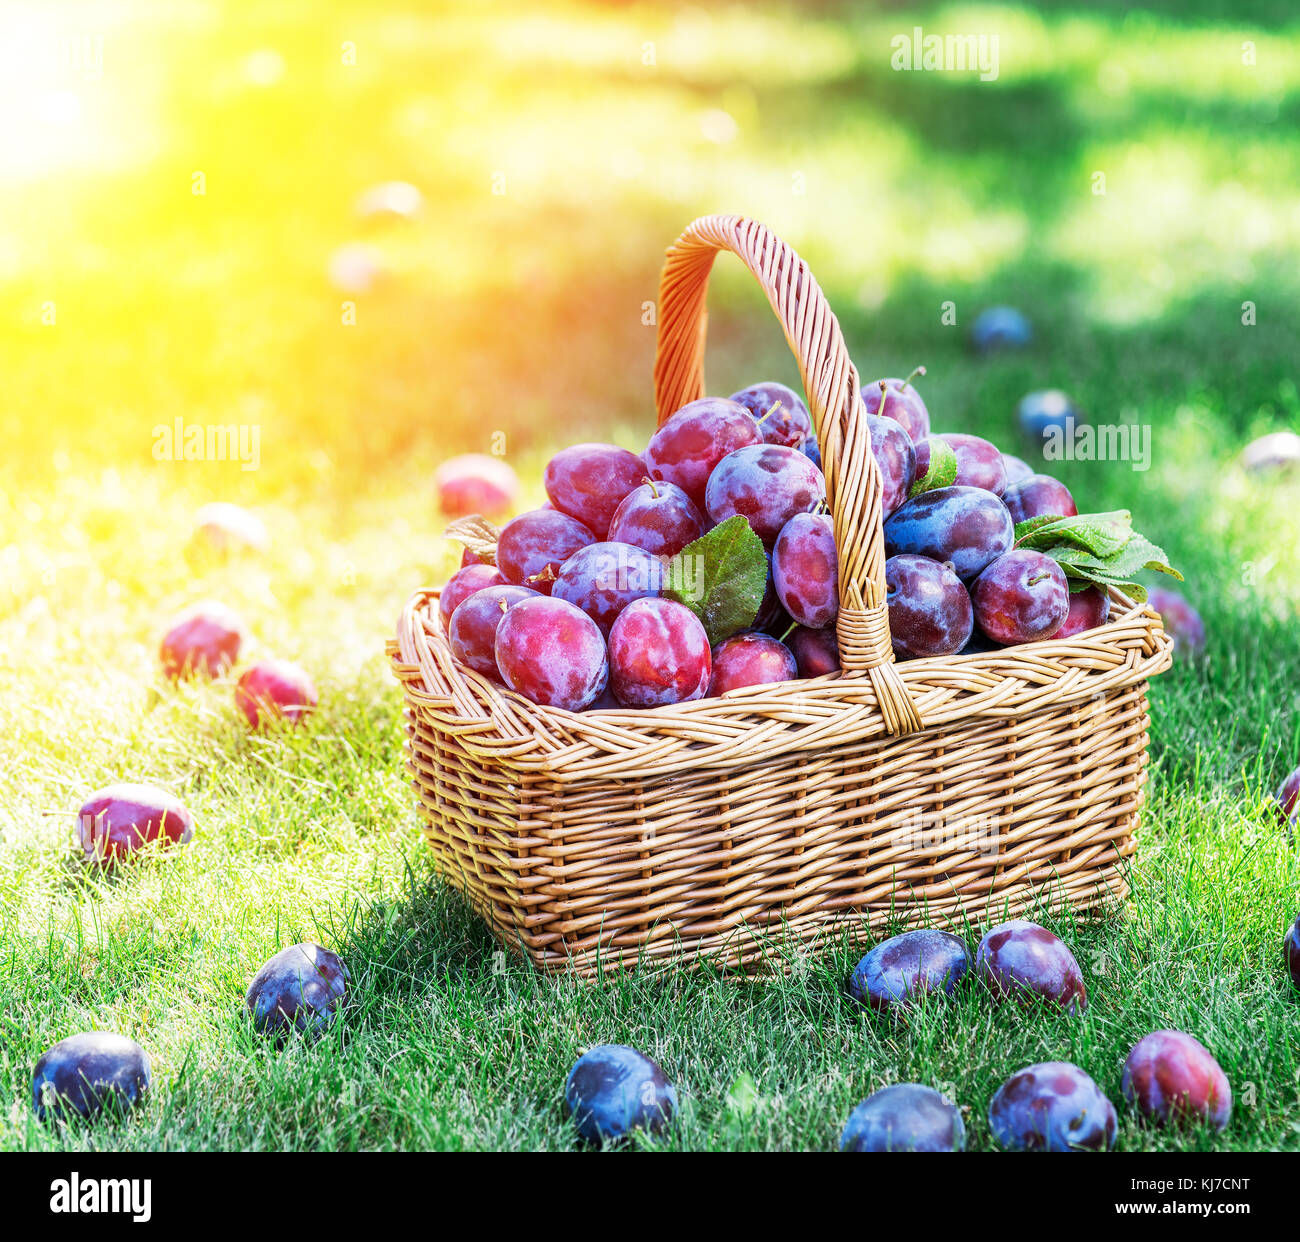 Plum harvest. Plums in the basket on the green grass. Stock Photo